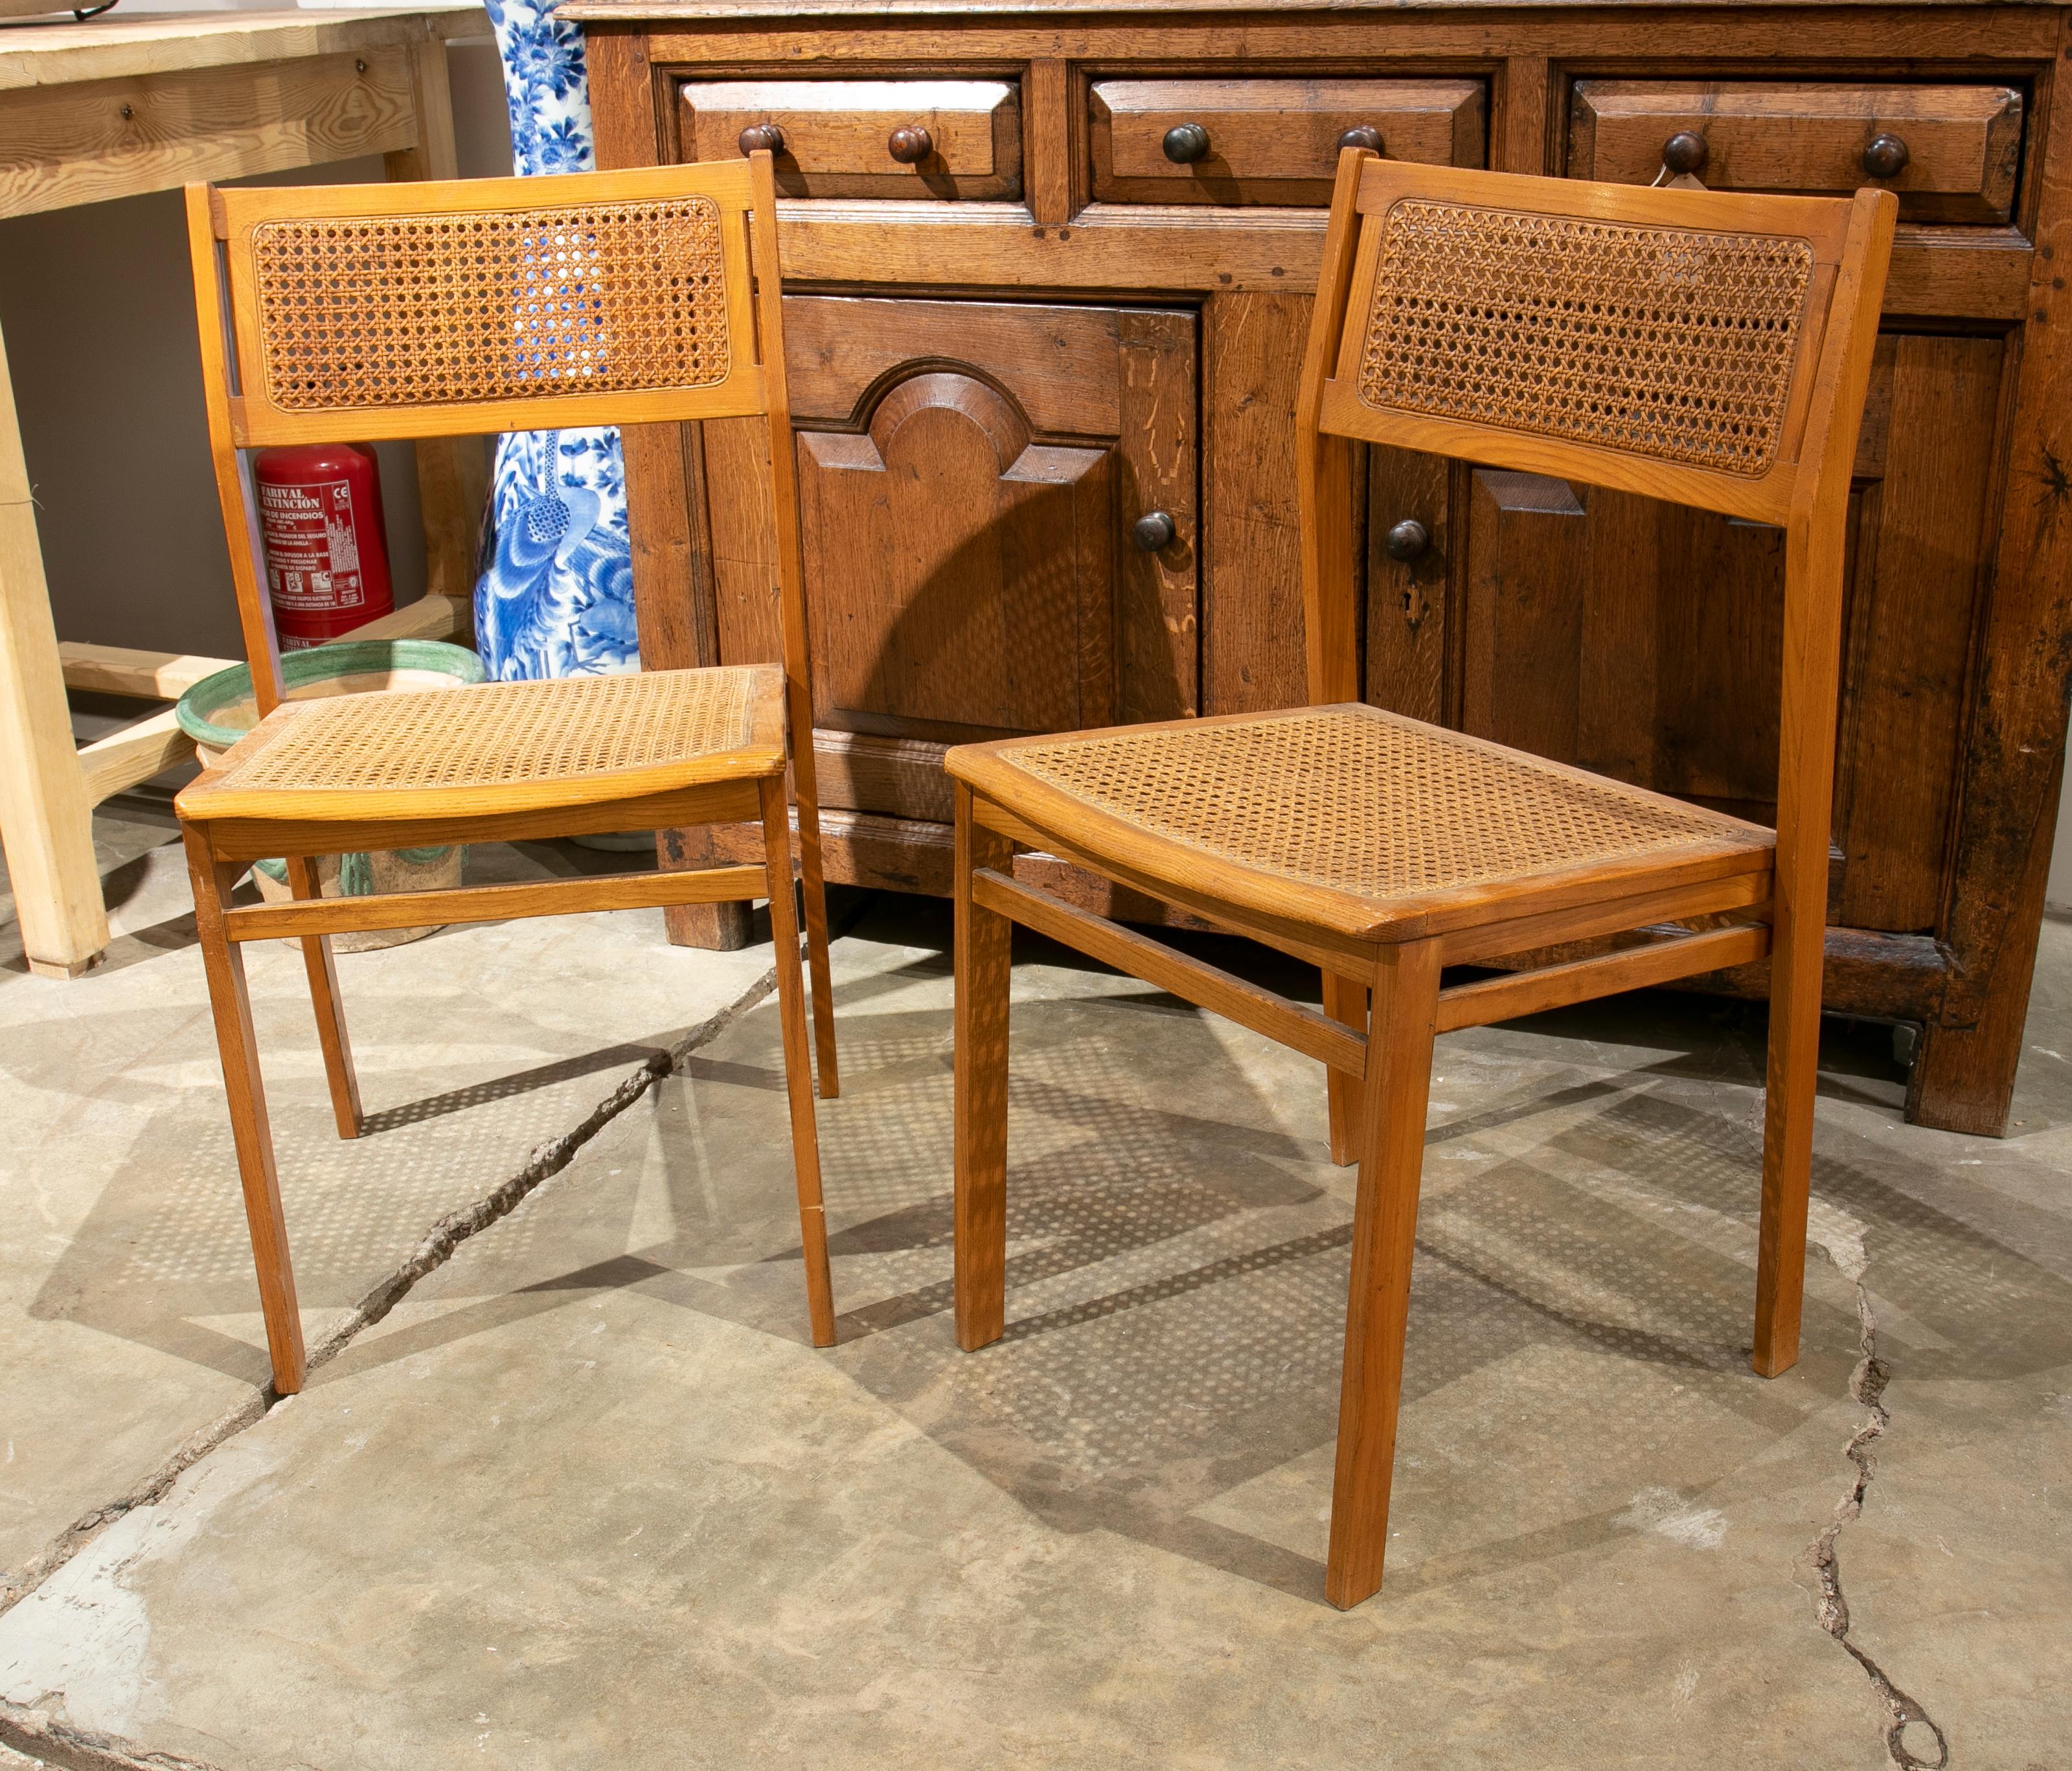 1970s Swedish Pair of Wooden Chairs with Wicker Seat and Back For Sale 8